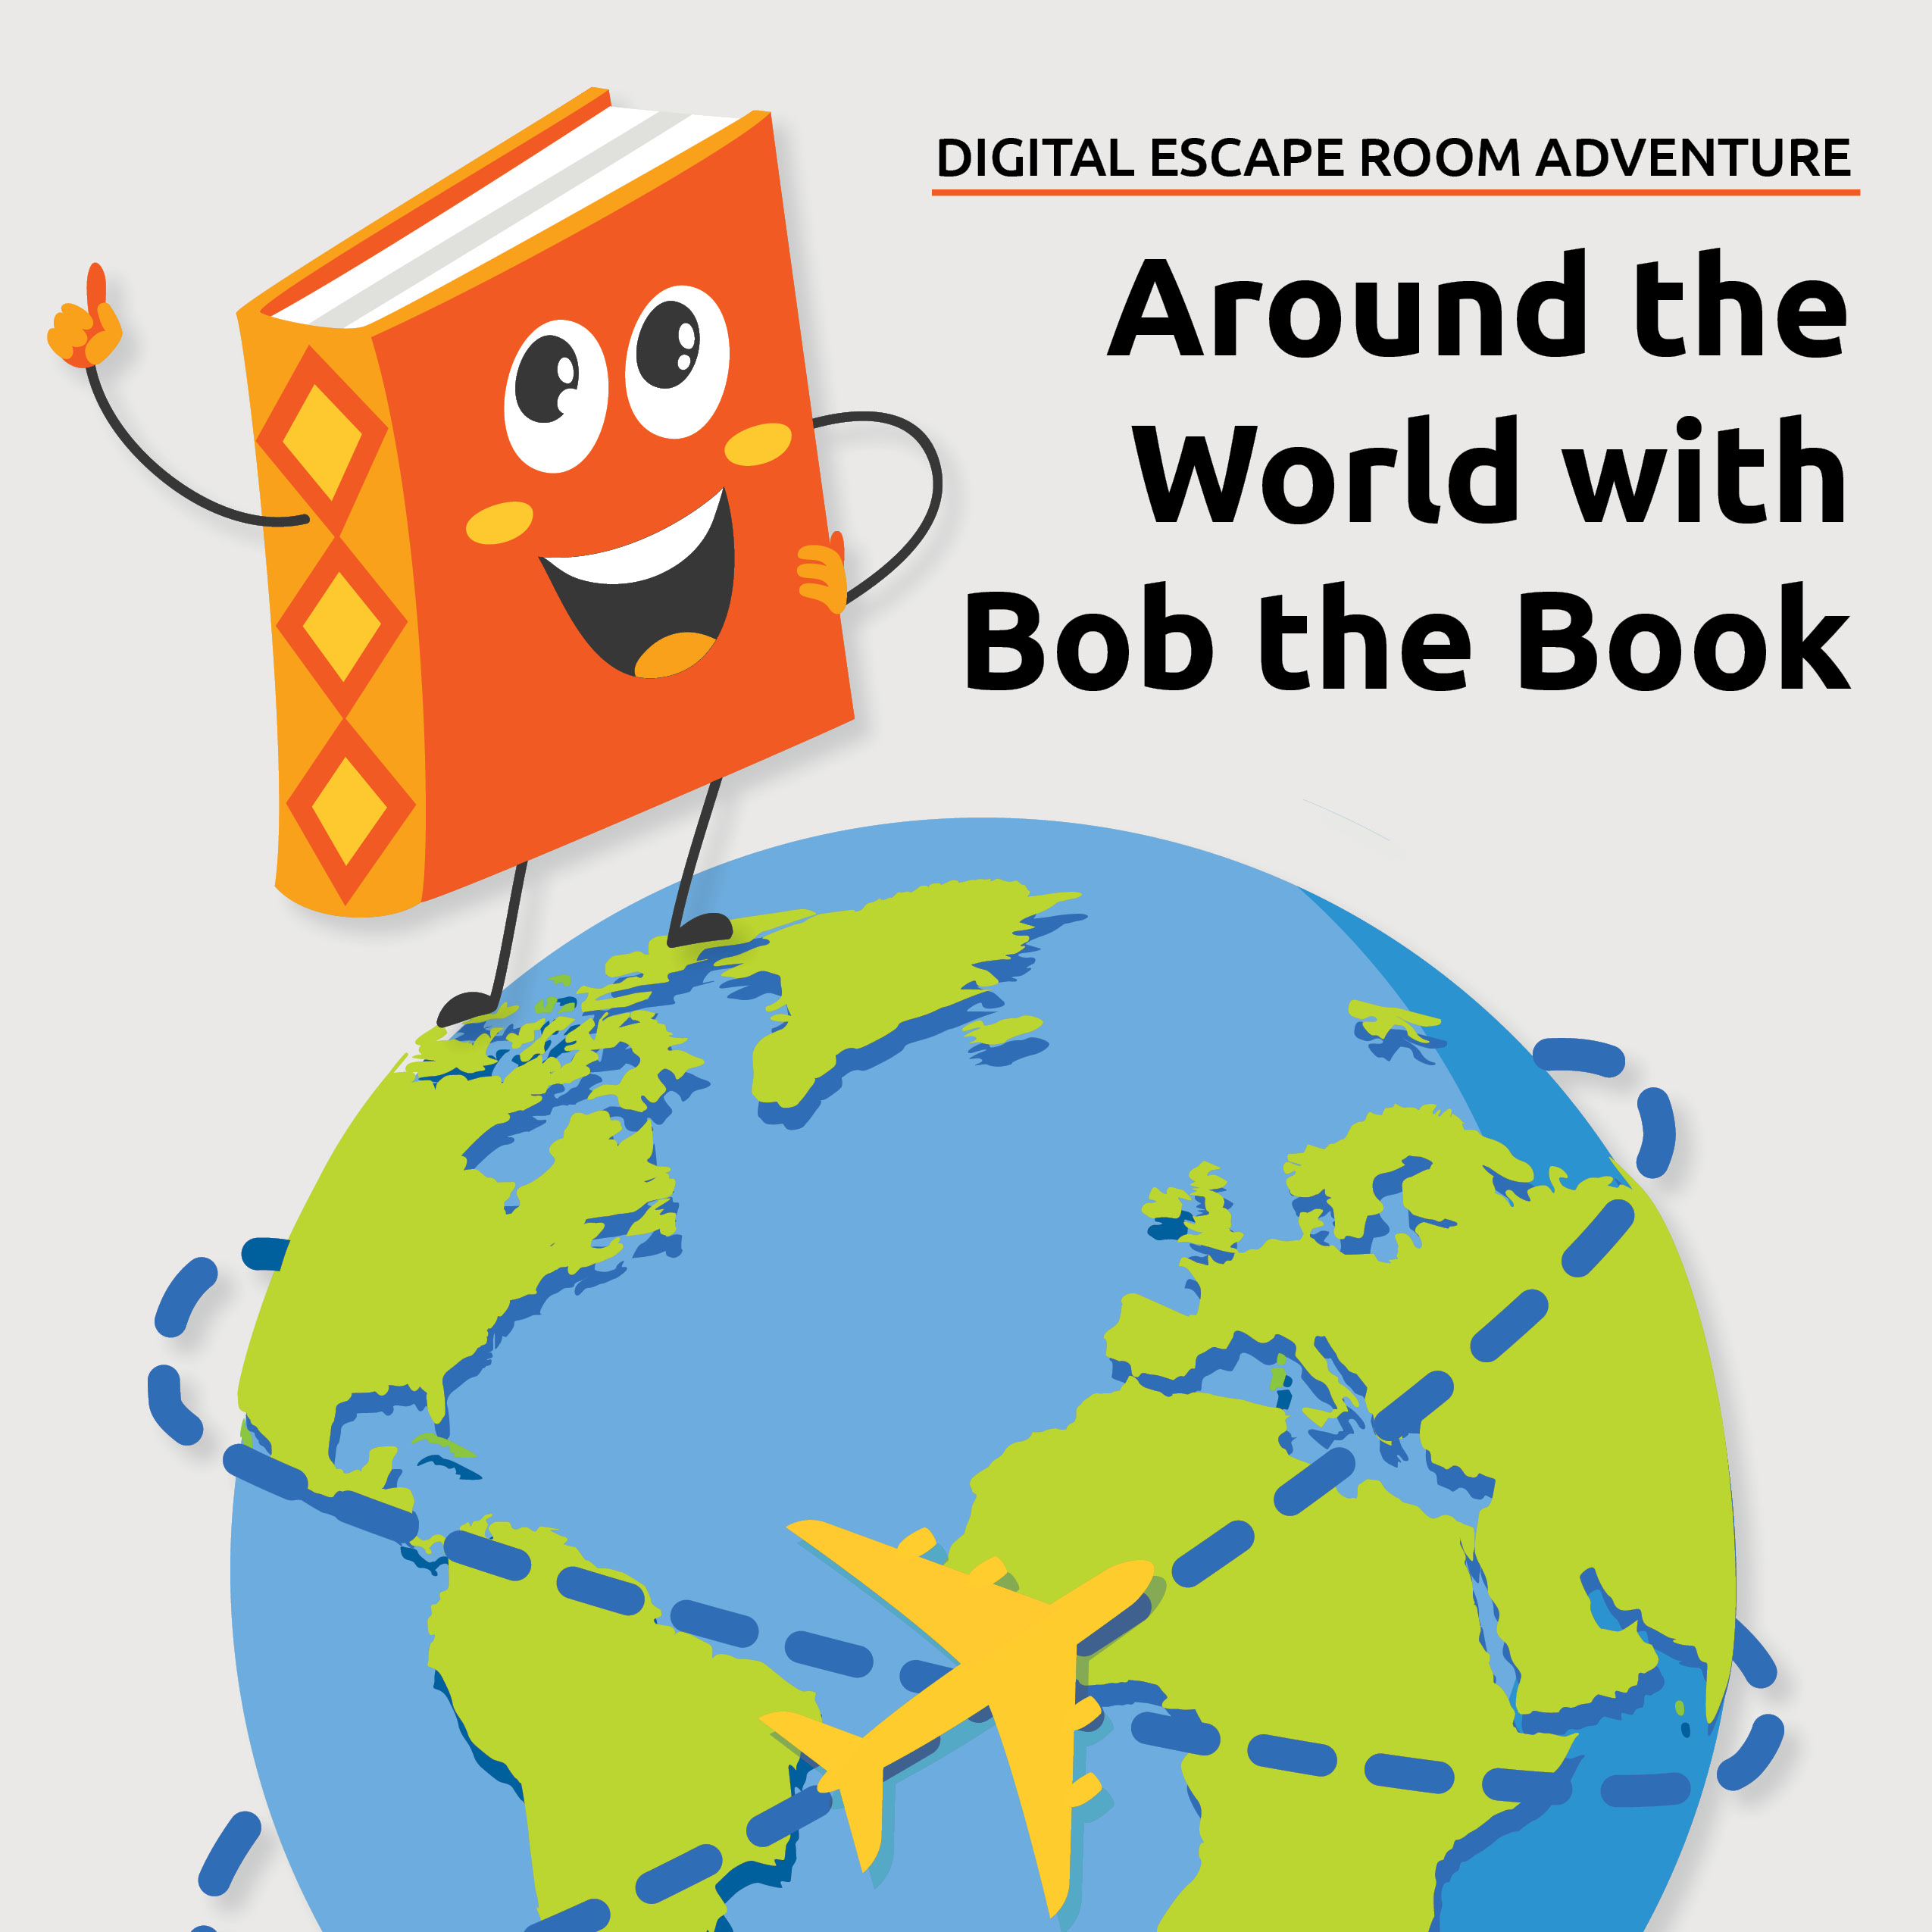 Illustrations of Bob the Book and the World